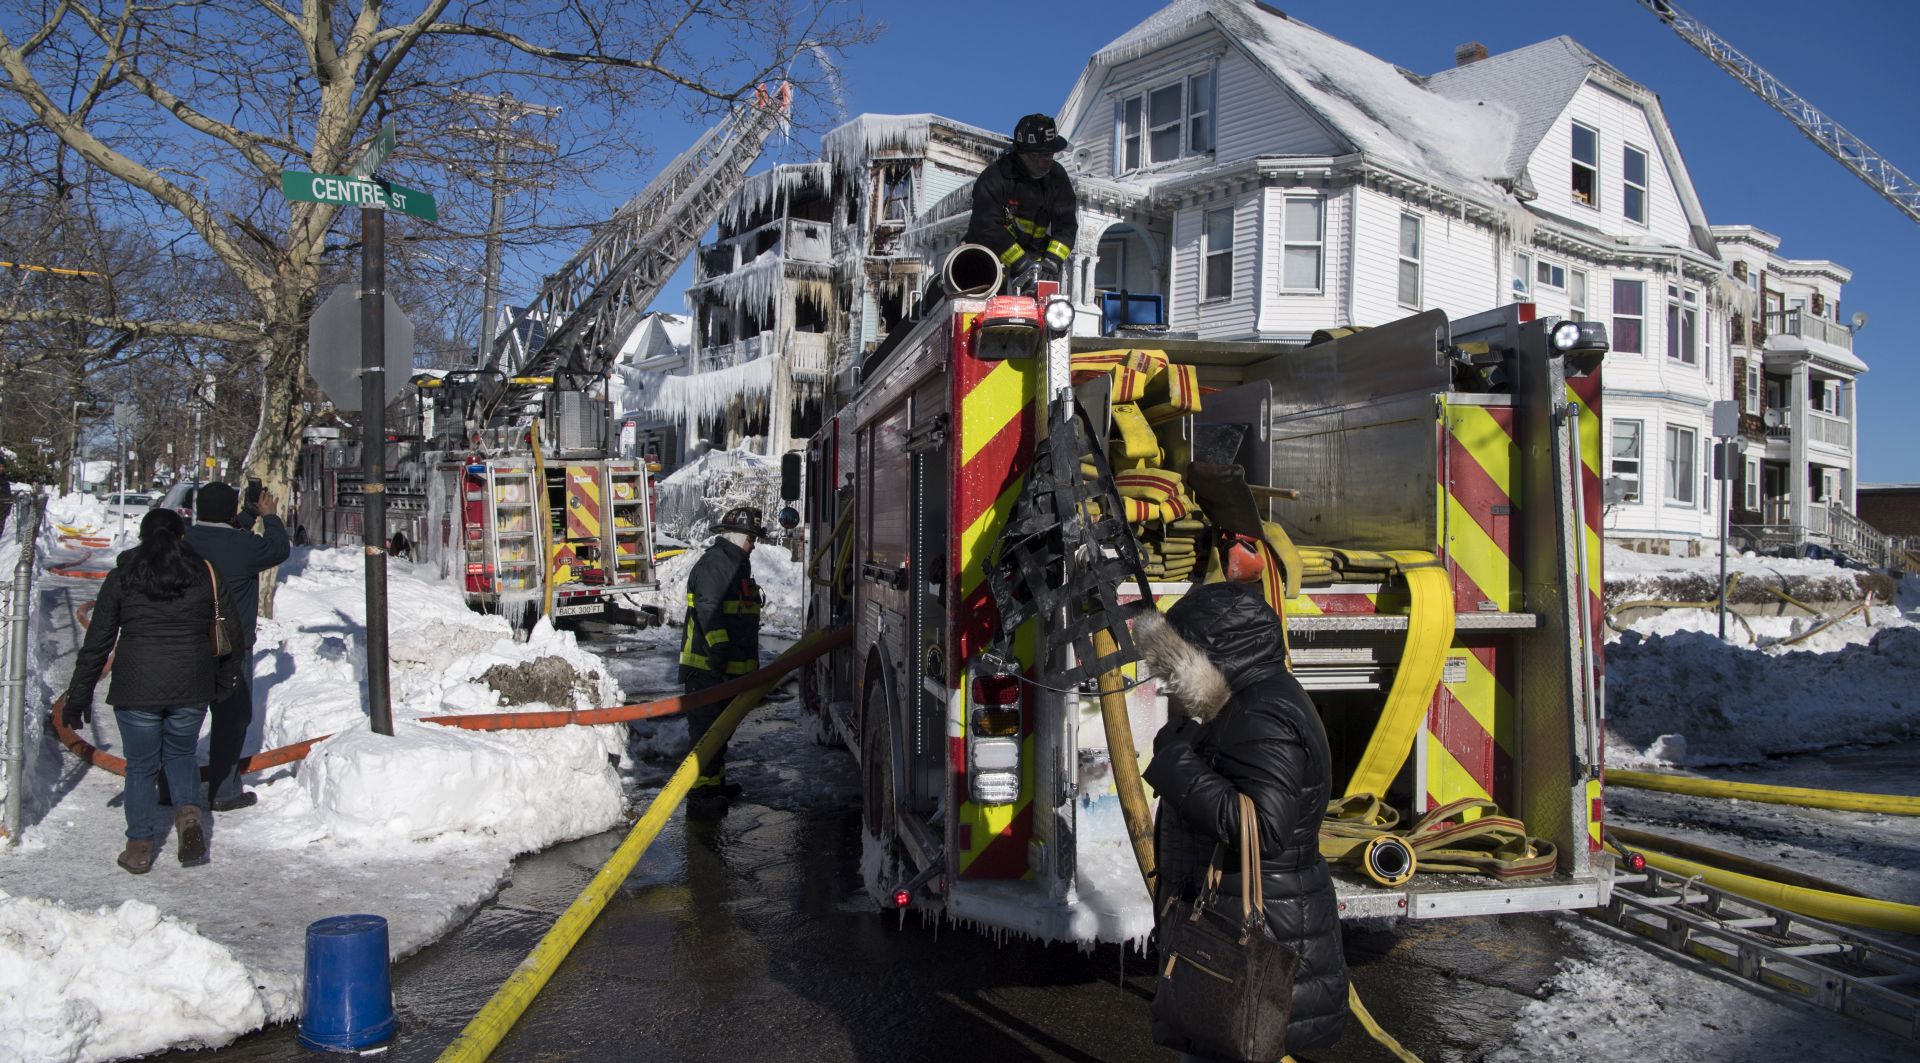 epa06423225 An overnight 5 alarm fire in the Dorchester neighborhood was fought in icy cold temperatures and high winds,  Boston, Massachusetts, USA 07 January 2018. The building is encased in ice after firefighters spent the night battling the blaze that left 25 residents displaced.  EPA/JOHN CETRINO